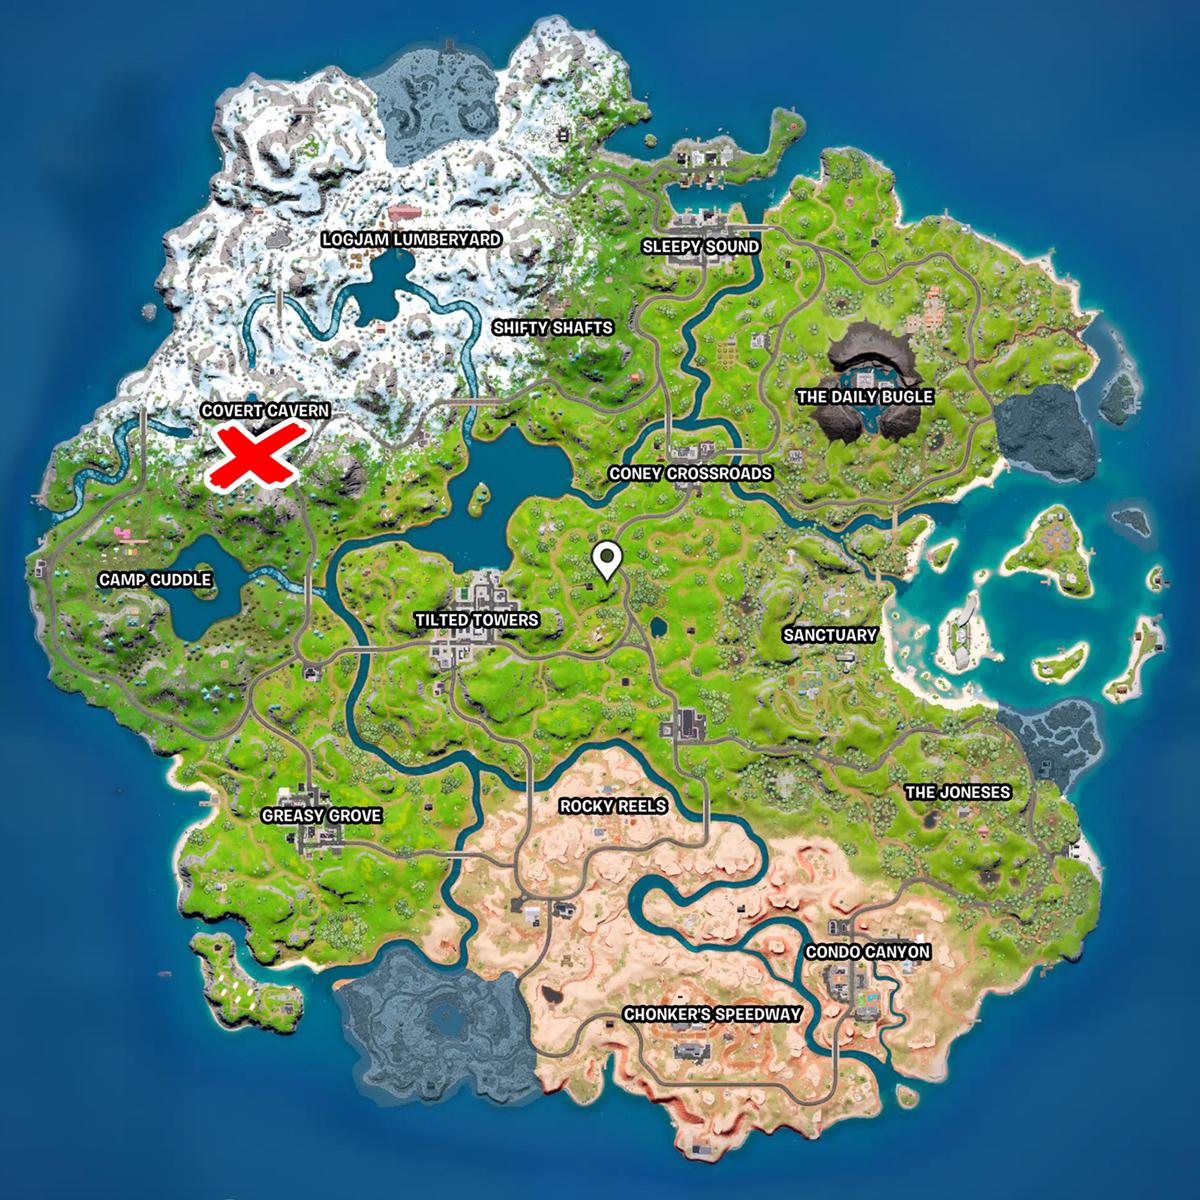 Gunnar's location on the Fortnite map